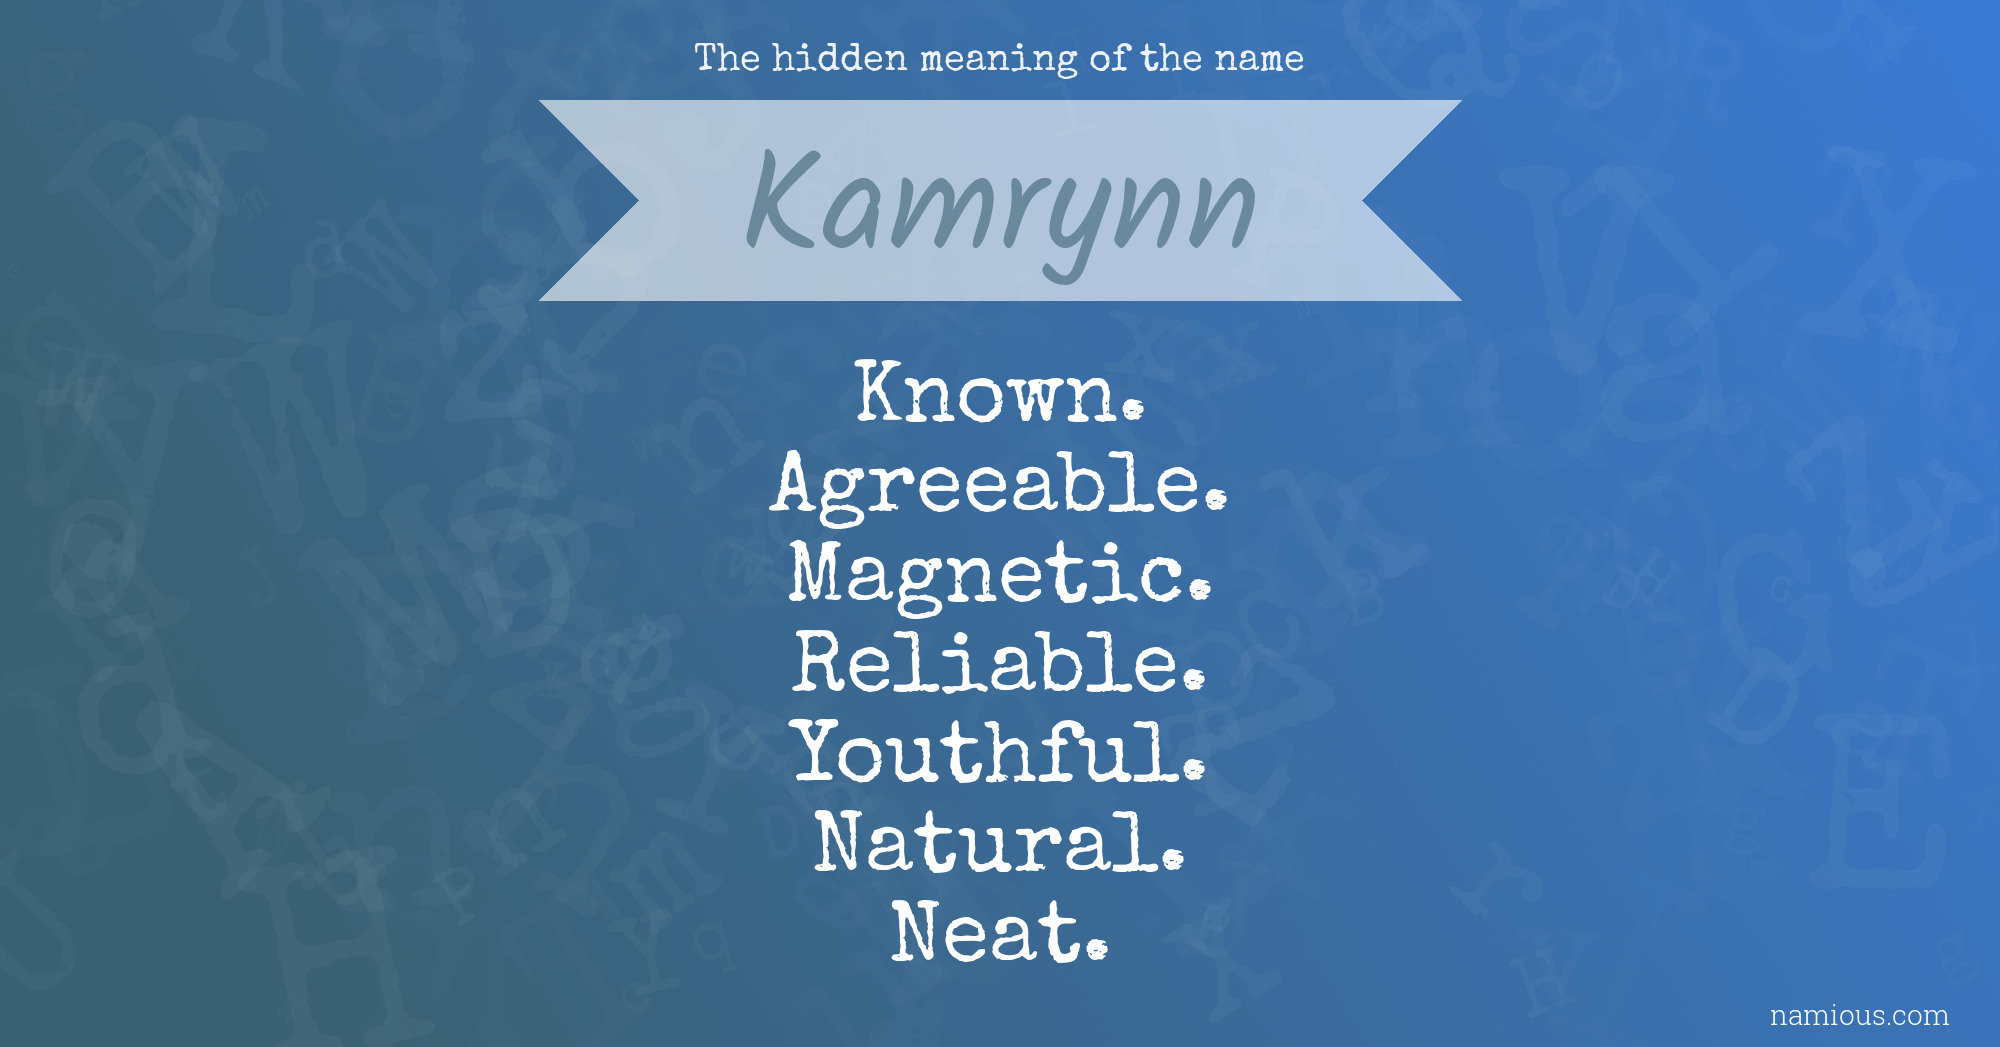 The hidden meaning of the name Kamrynn